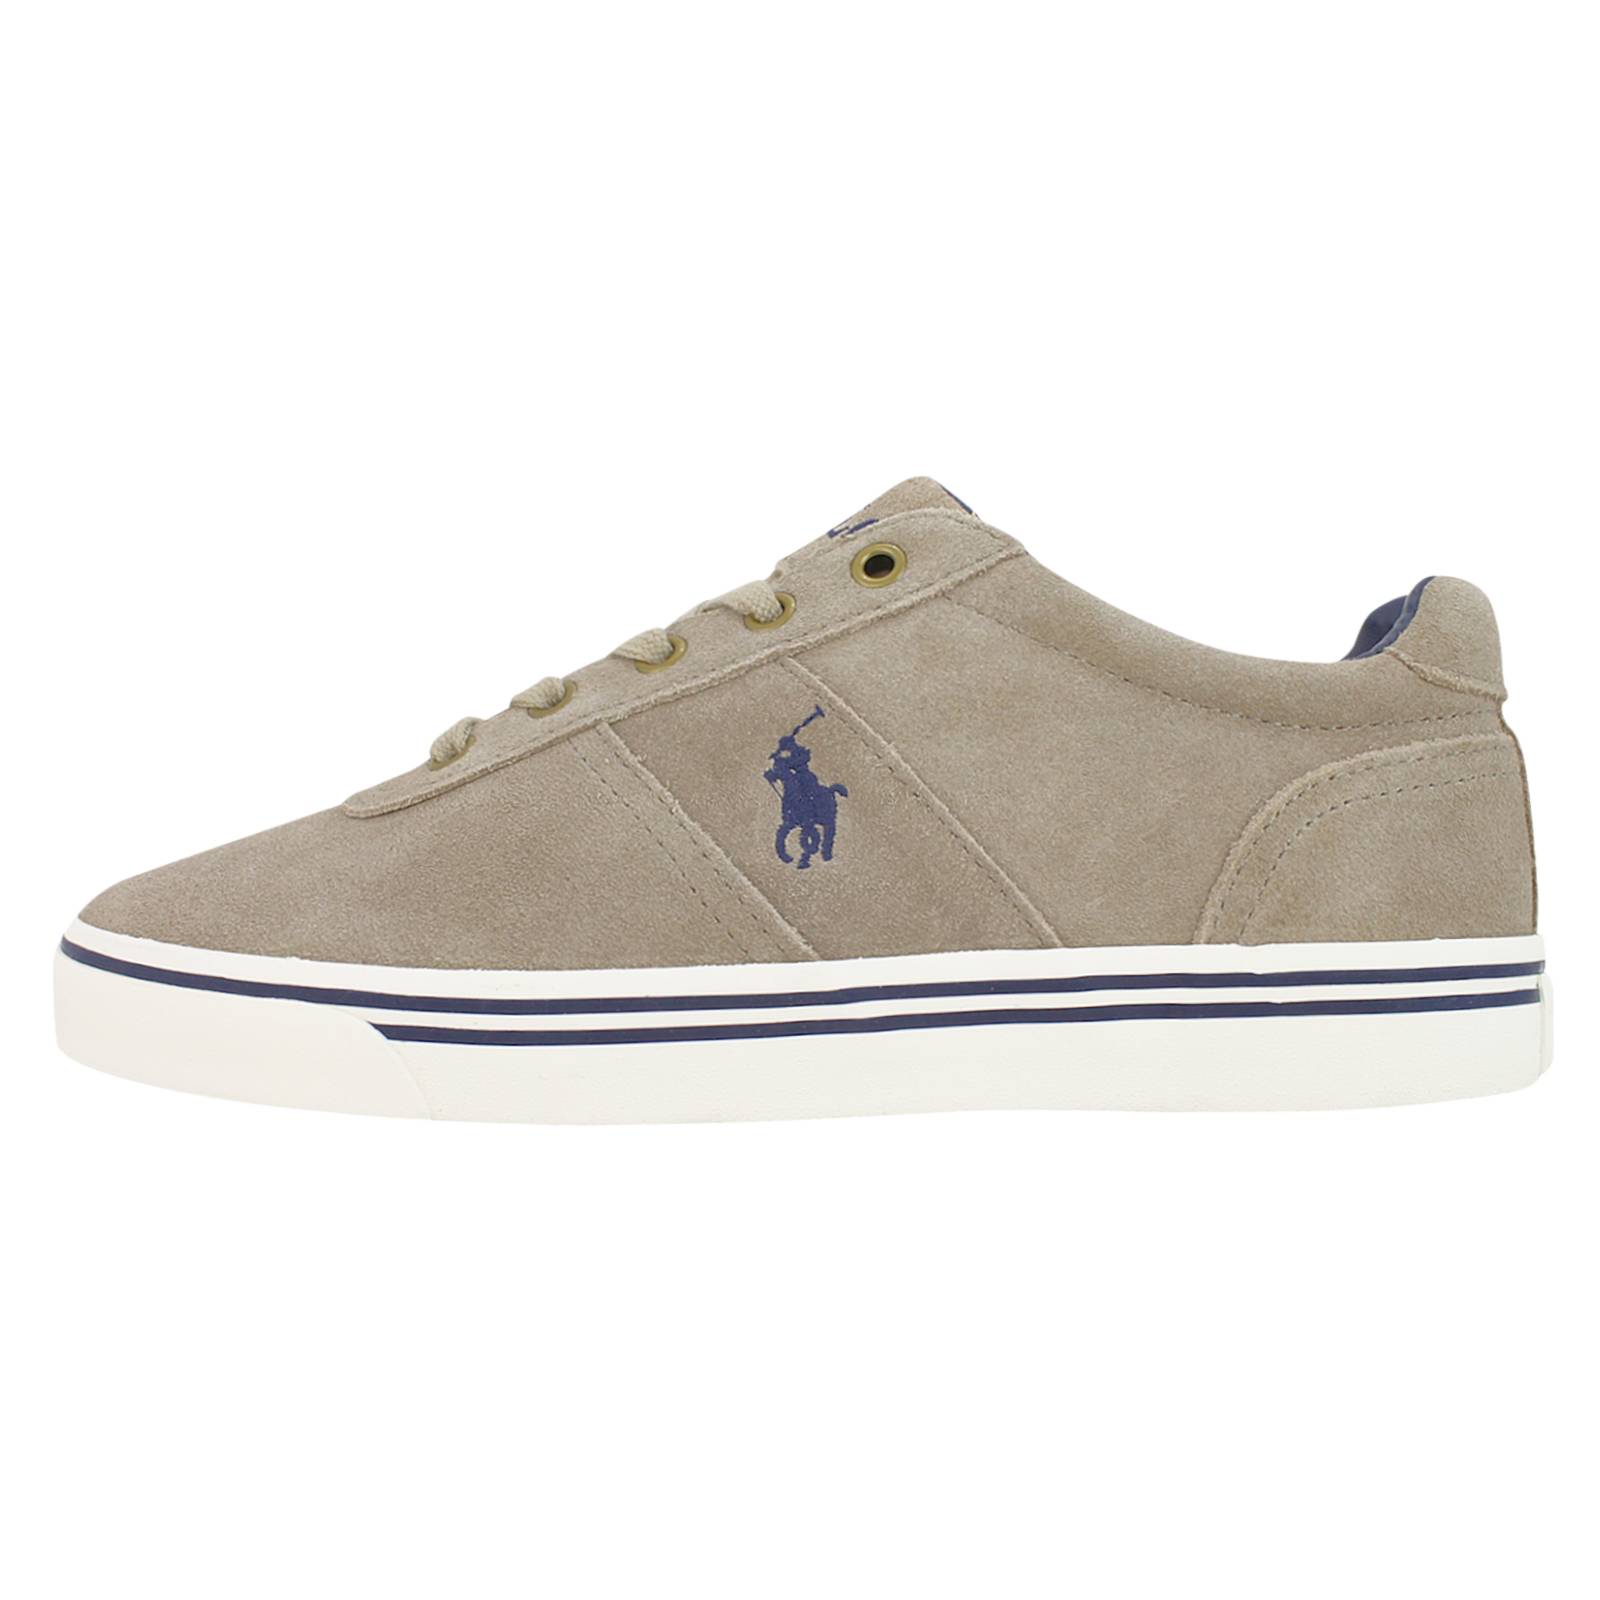 Hanford Sneakers Vulc - Polo Ralph Lauren Men's casual shoes made of ...